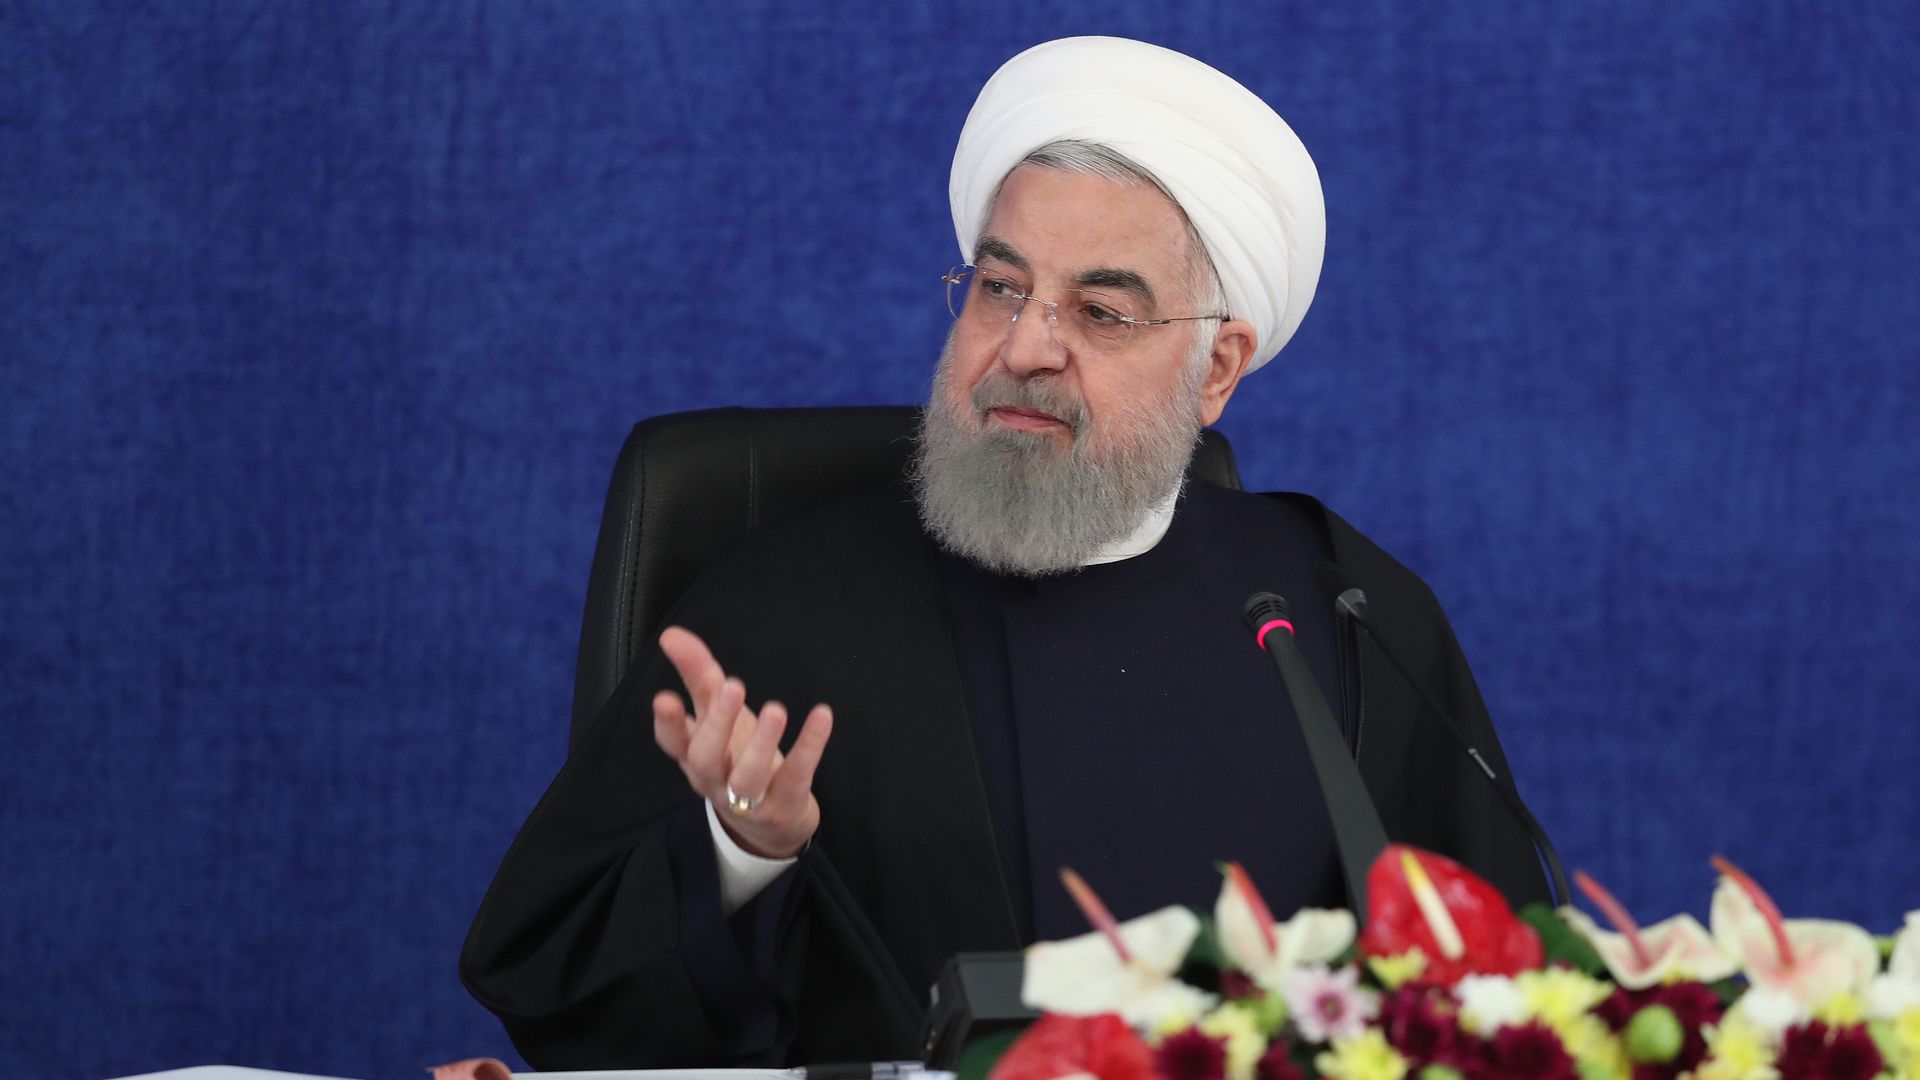 President of Iran Hassan Rouhani during a press conference on Jan. 2.